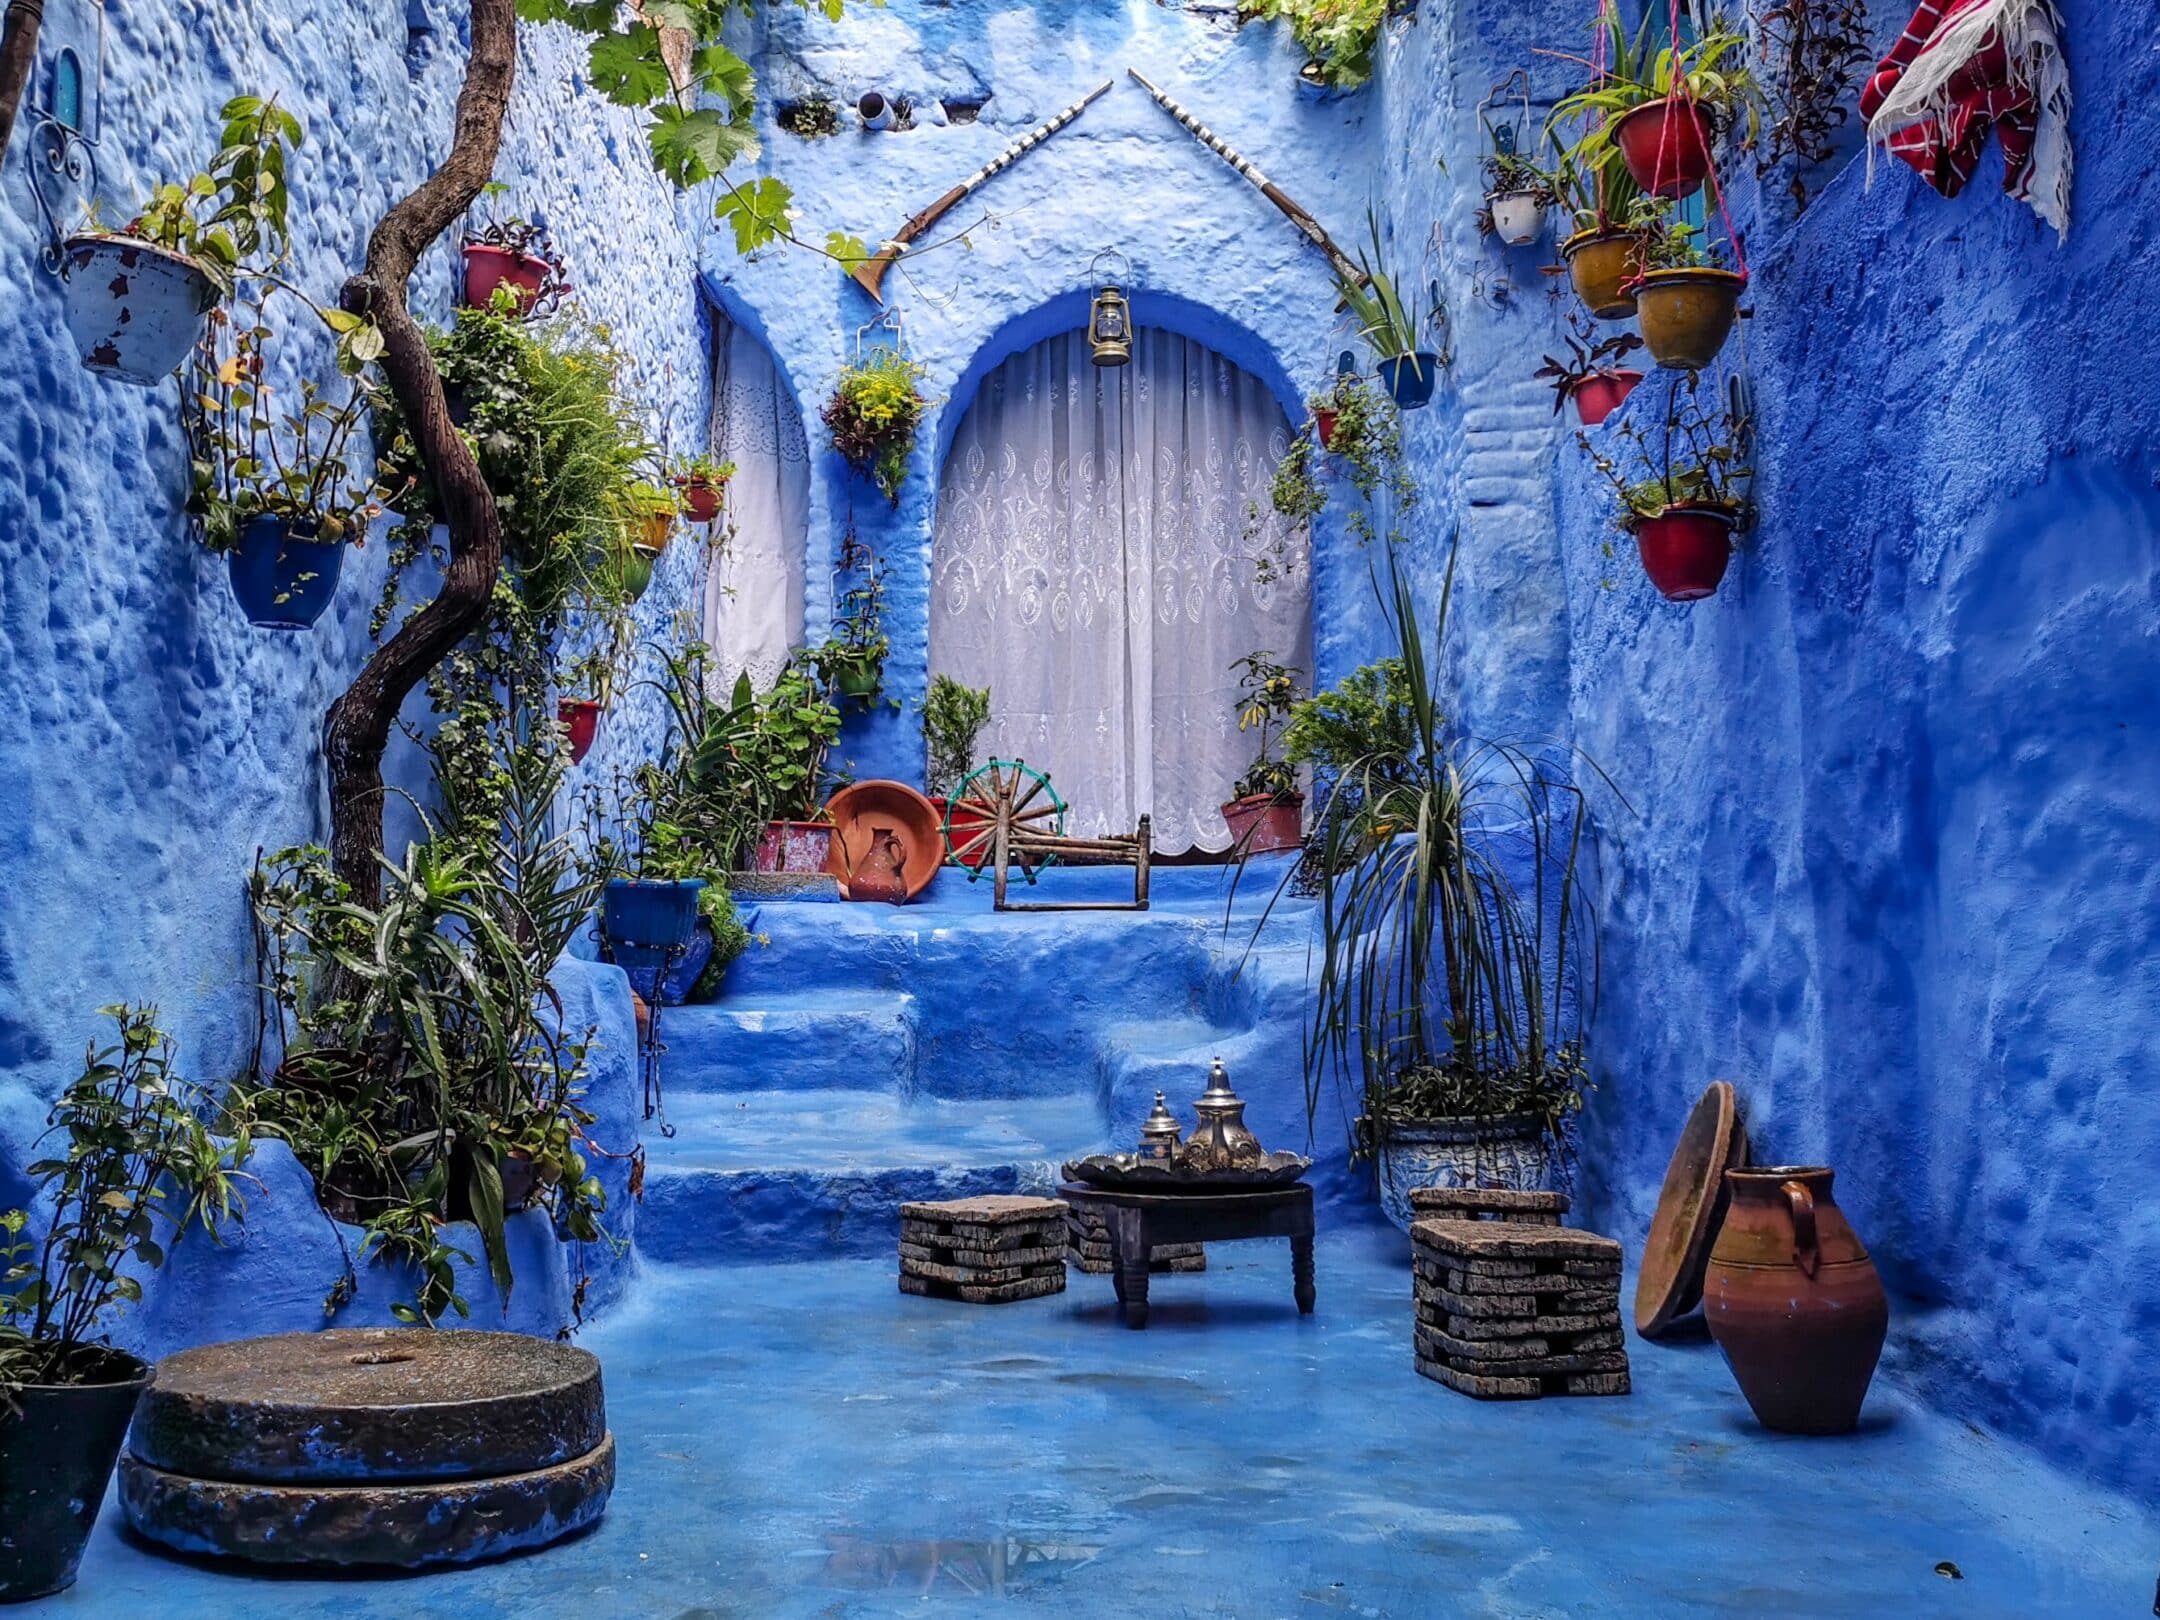 Travel to Morocco - The Blue City